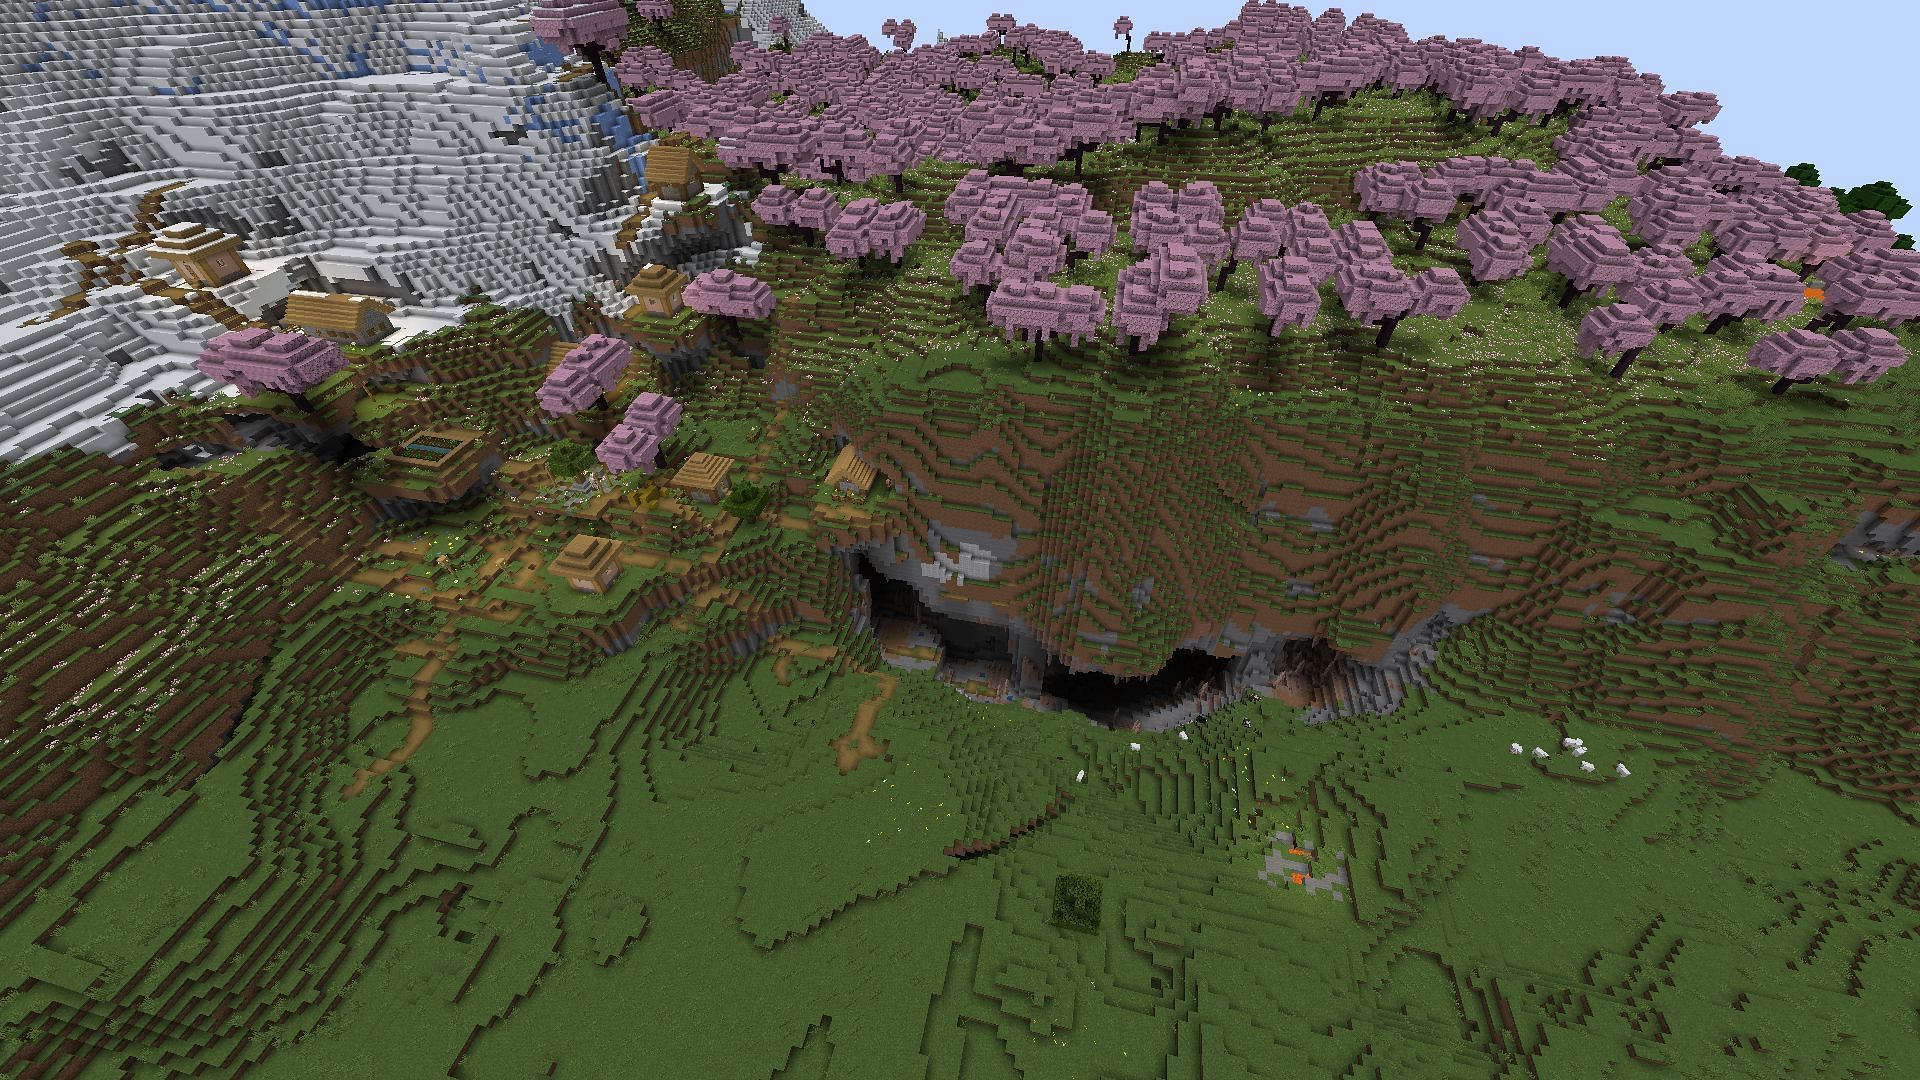 The new cherry grove biome and plenty of structures await Minecraft fans in this seed (Image via Mojang)